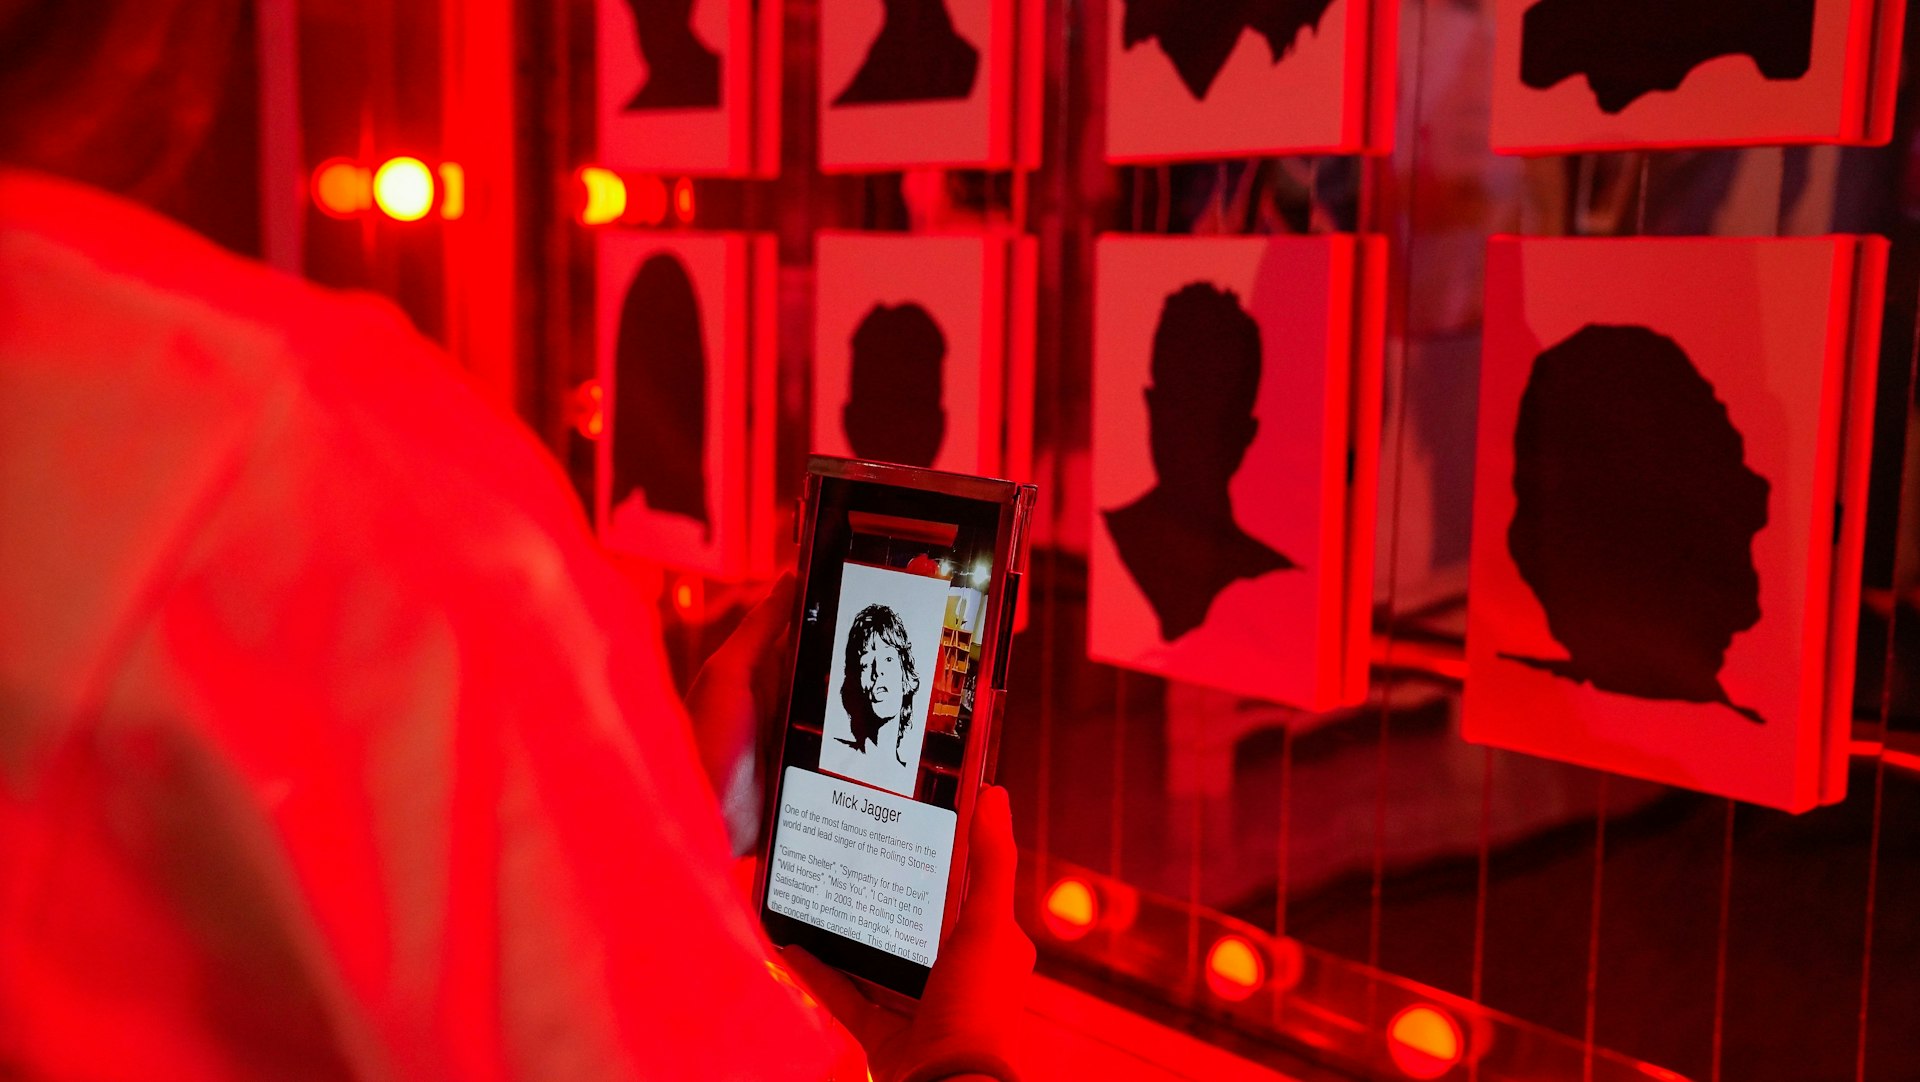 The wall of fame in the Patpong Museum. A visitor holds up a mobile phone to uncover who the silhouette on the wall belongs to. In this instance it is Mick Jagger.